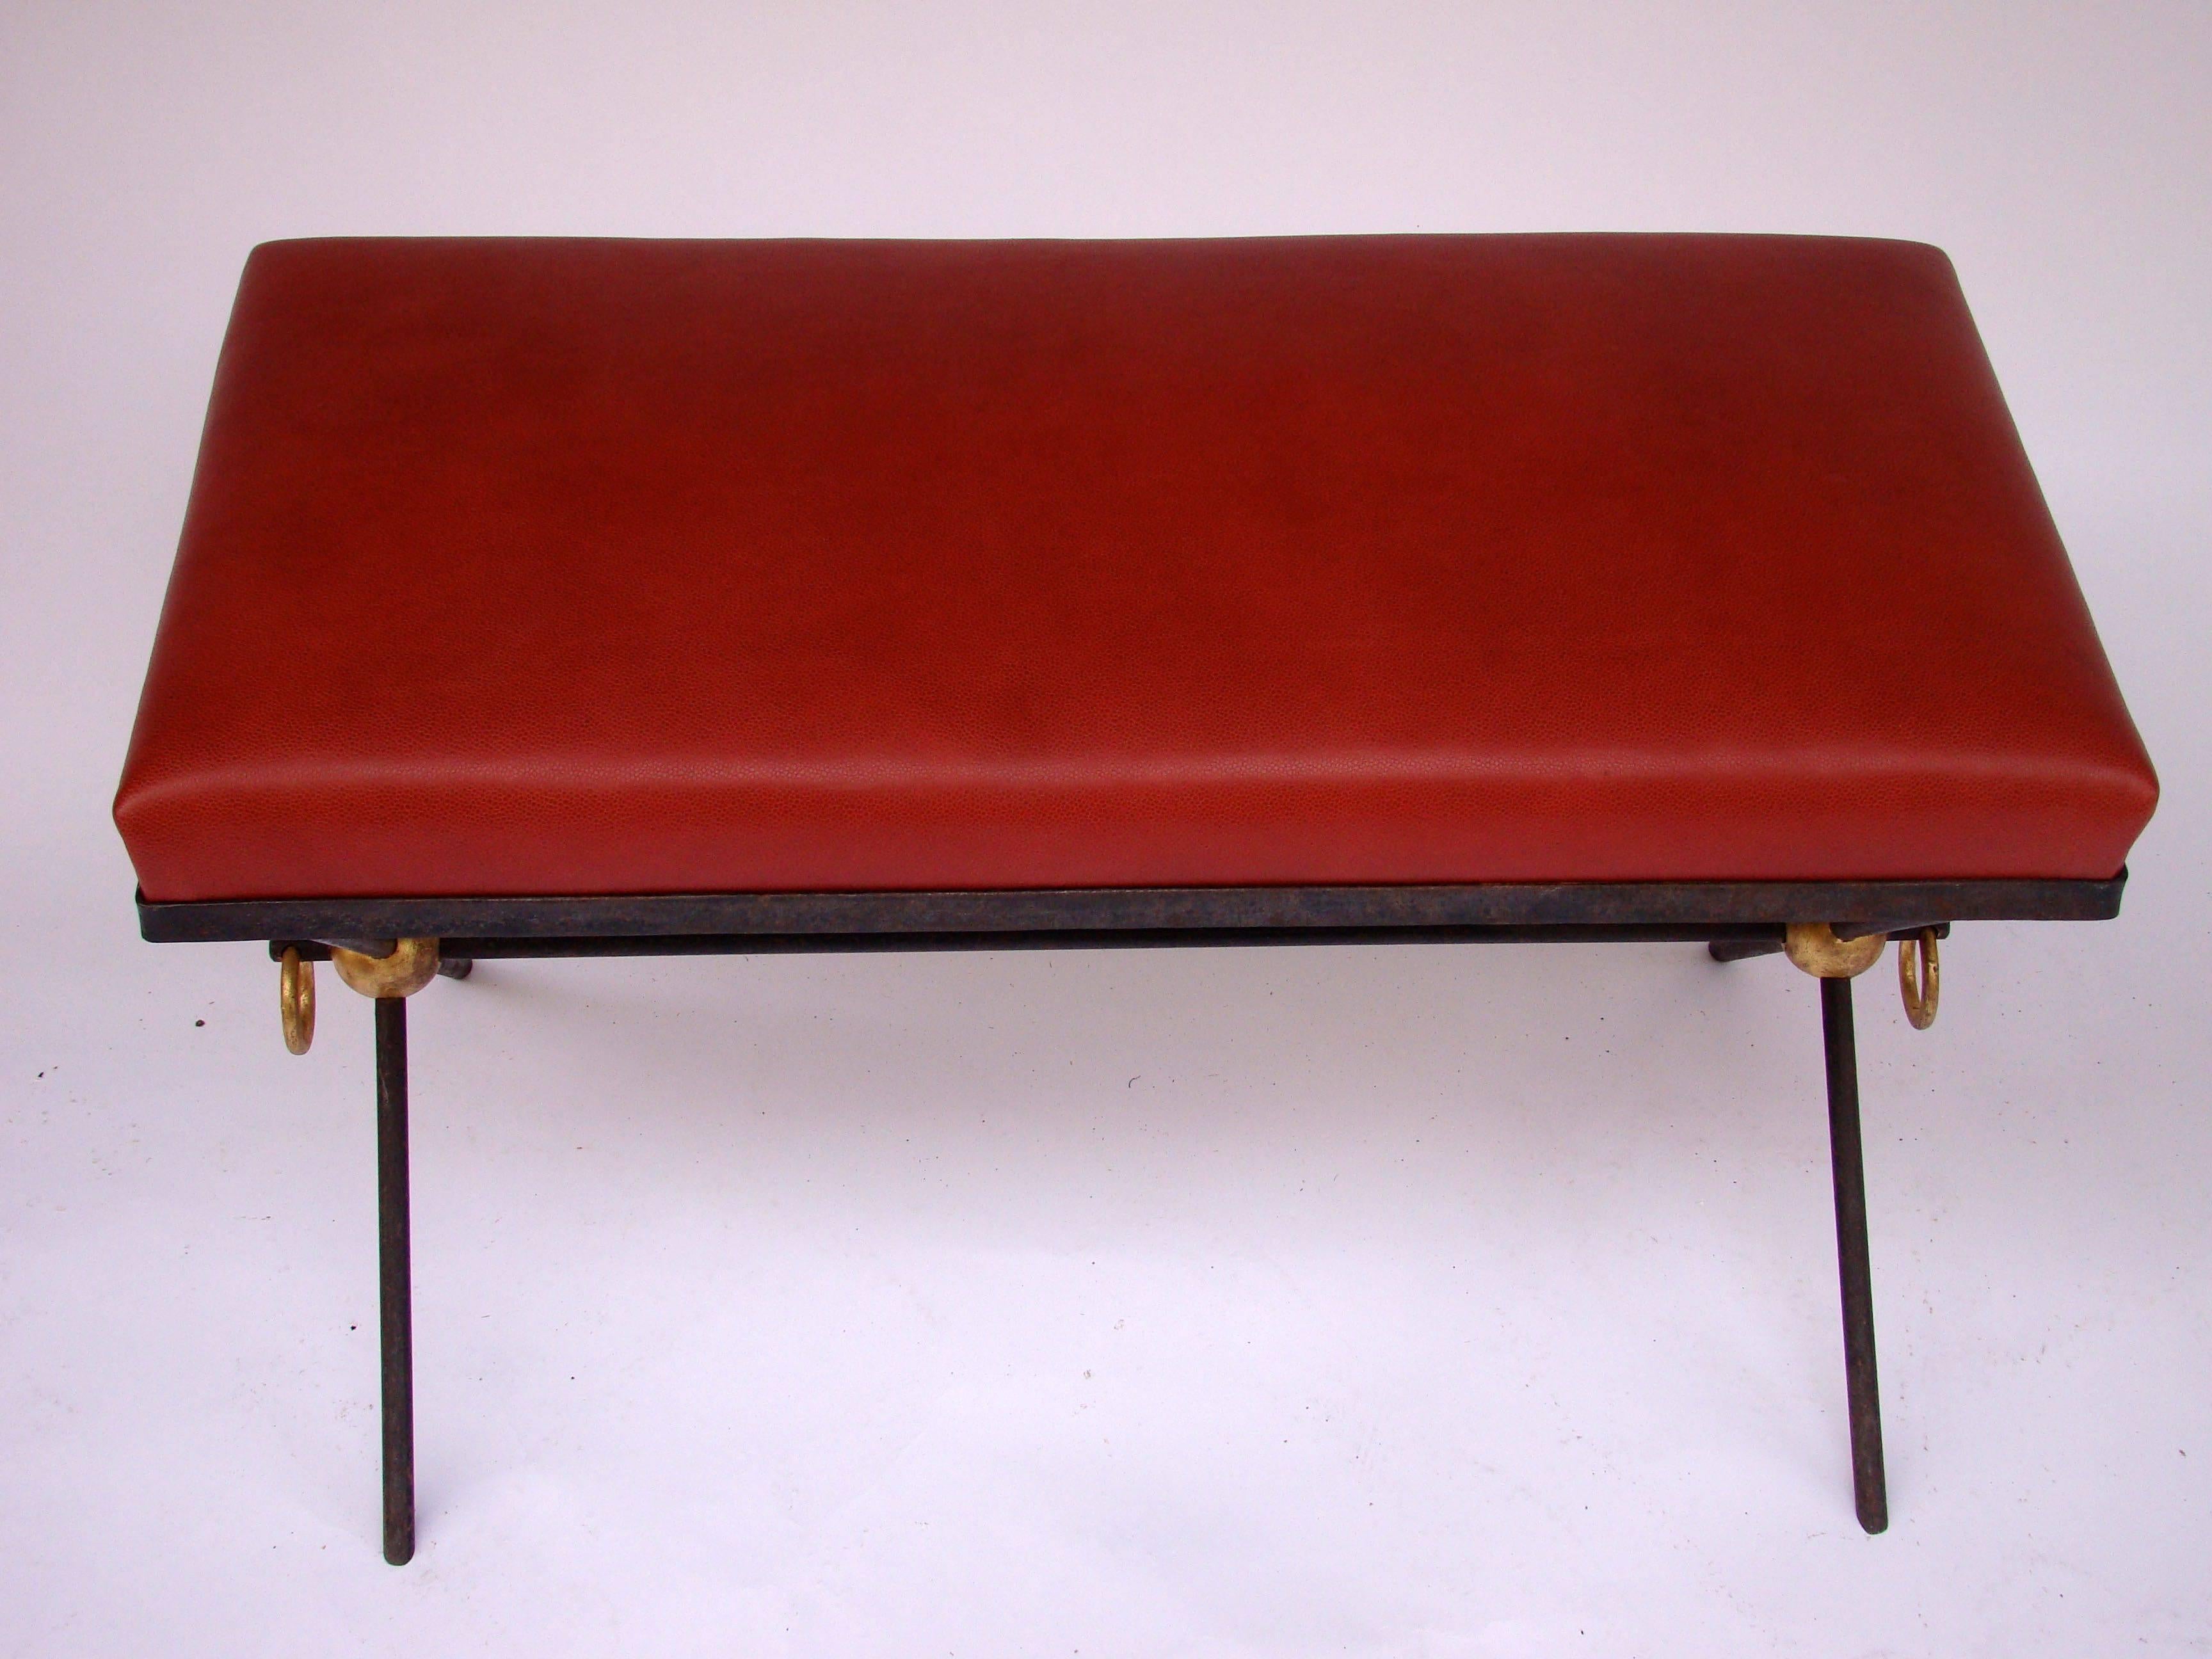 Elegant bench in black and golden lacquered wrought iron with a red leather seat top, circa 1940.